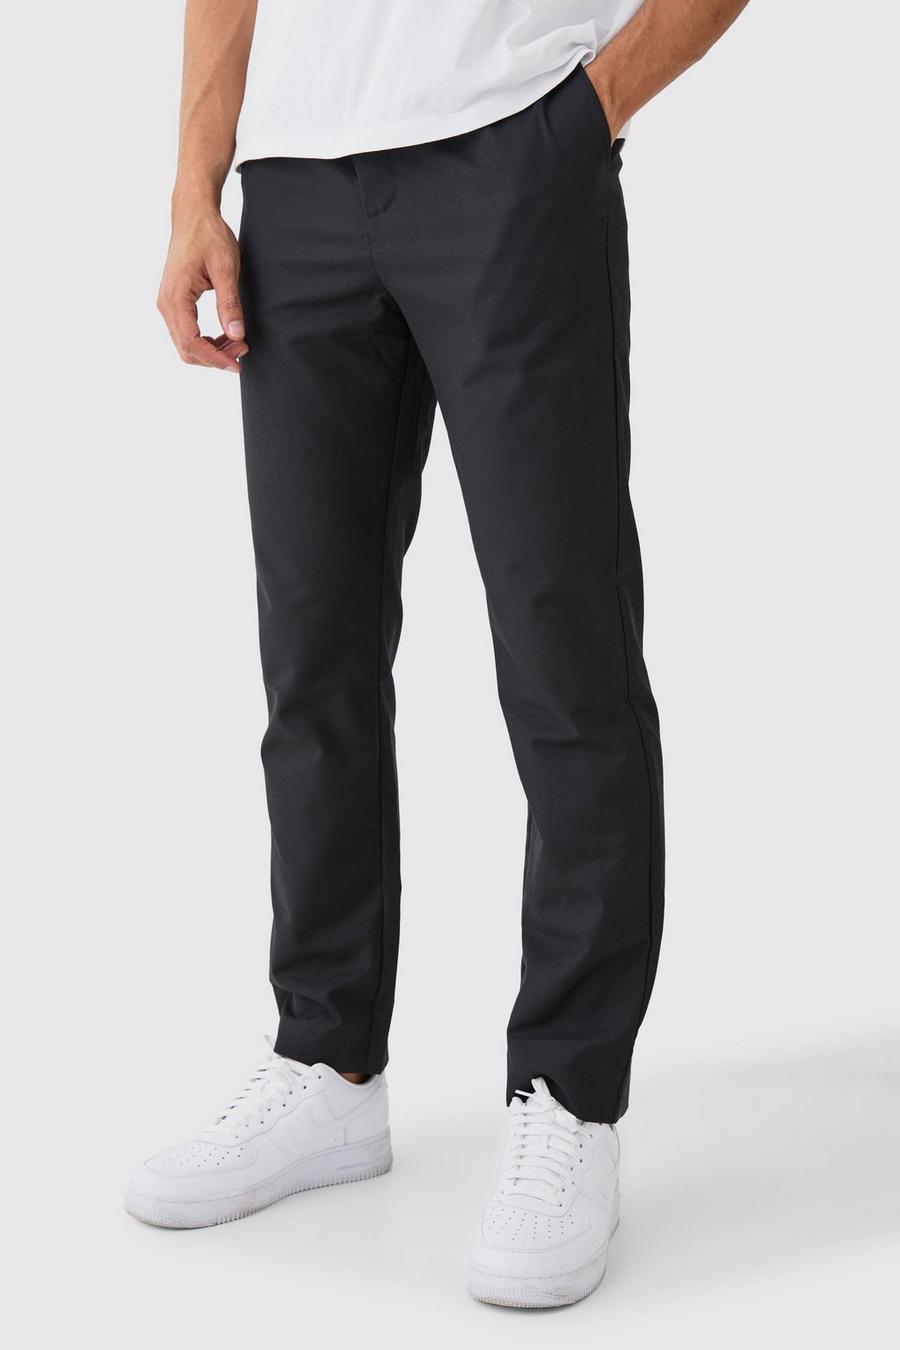 Black Wrap Over Tailored Straight Fit Pants